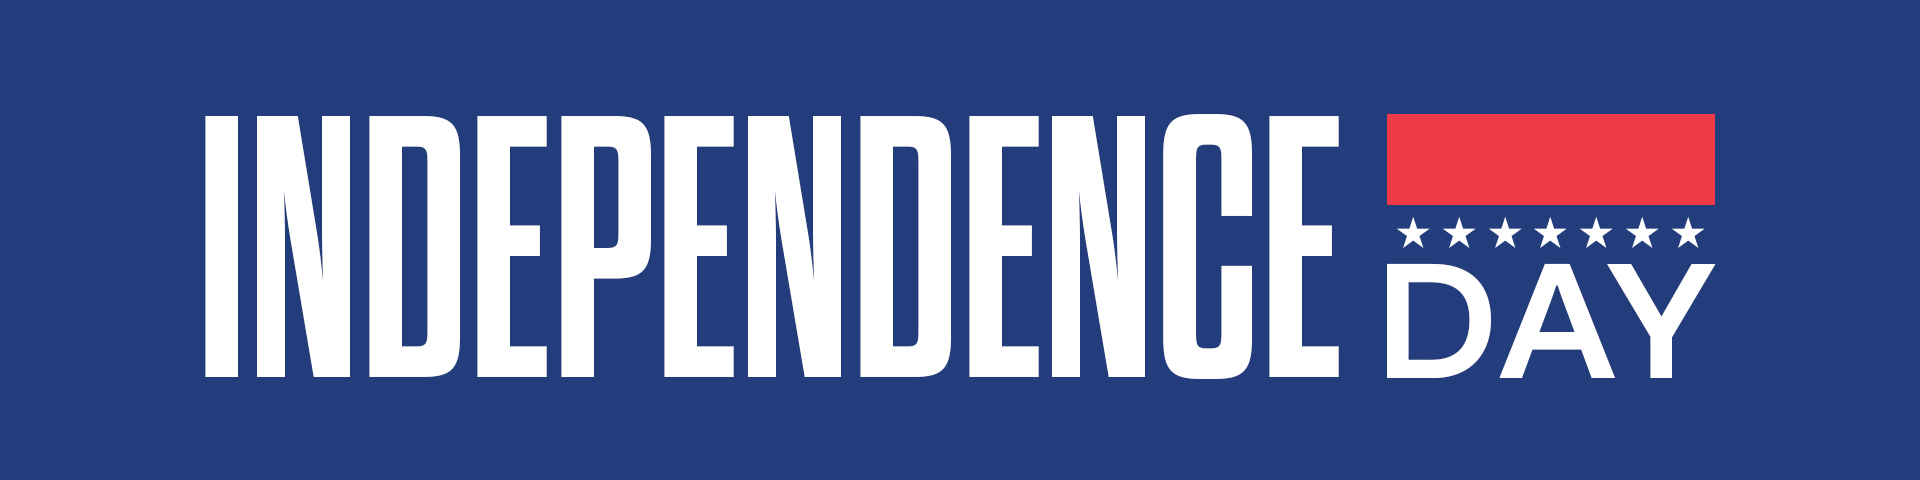 Independence_Day_Event_Banner_.jpg